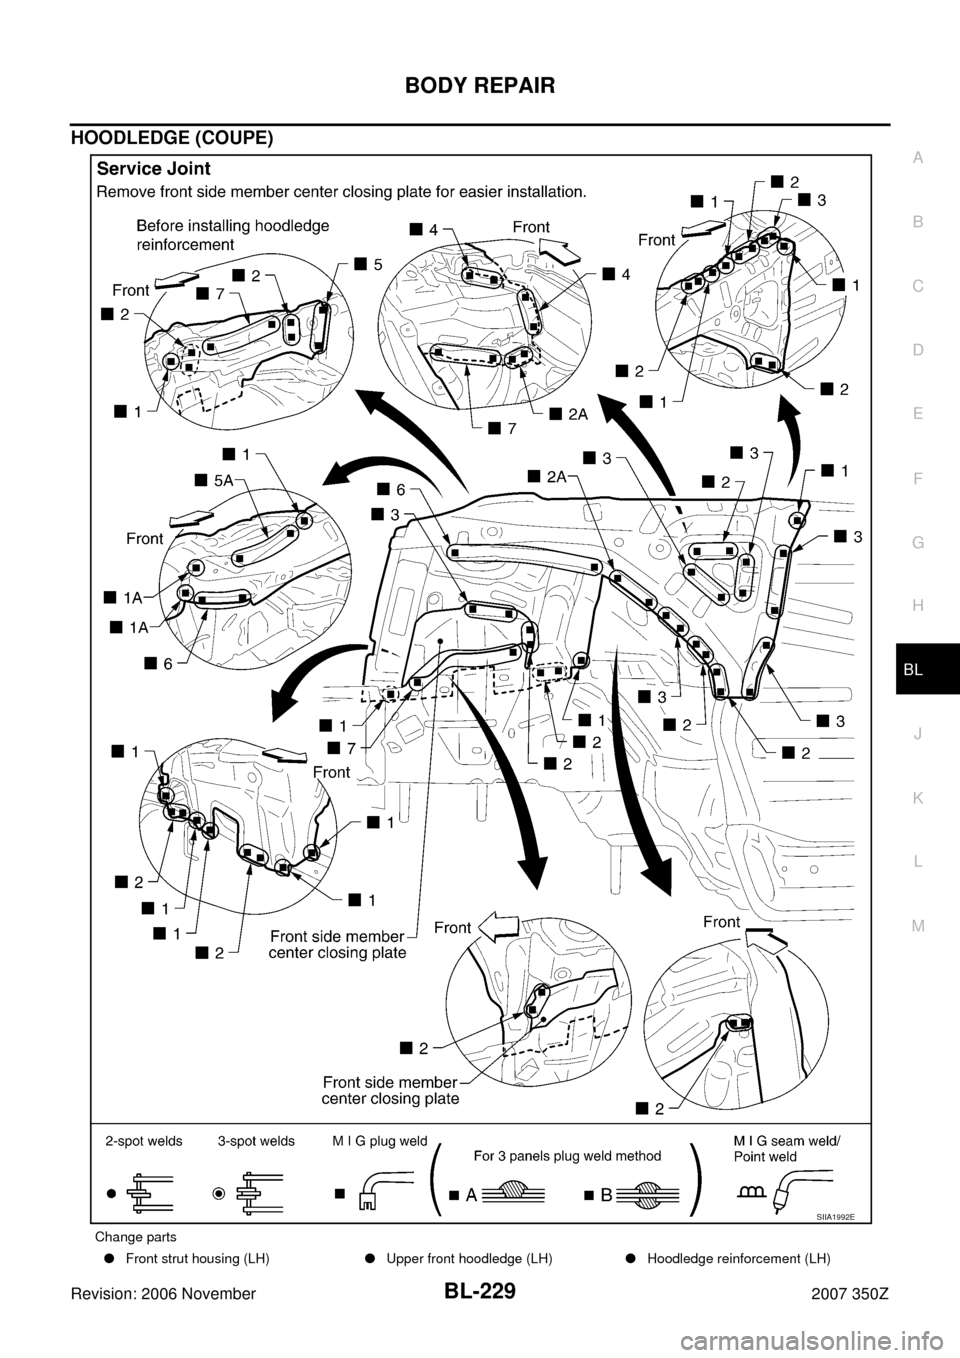 NISSAN 350Z 2007 Z33 Body, Lock And Security System Workshop Manual BODY REPAIR
BL-229
C
D
E
F
G
H
J
K
L
MA
B
BL
Revision: 2006 November2007 350Z
HOODLEDGE (COUPE)
Change parts
Front strut housing (LH)Upper front hoodledge (LH)Hoodledge reinforcement (LH)
SIIA1992E